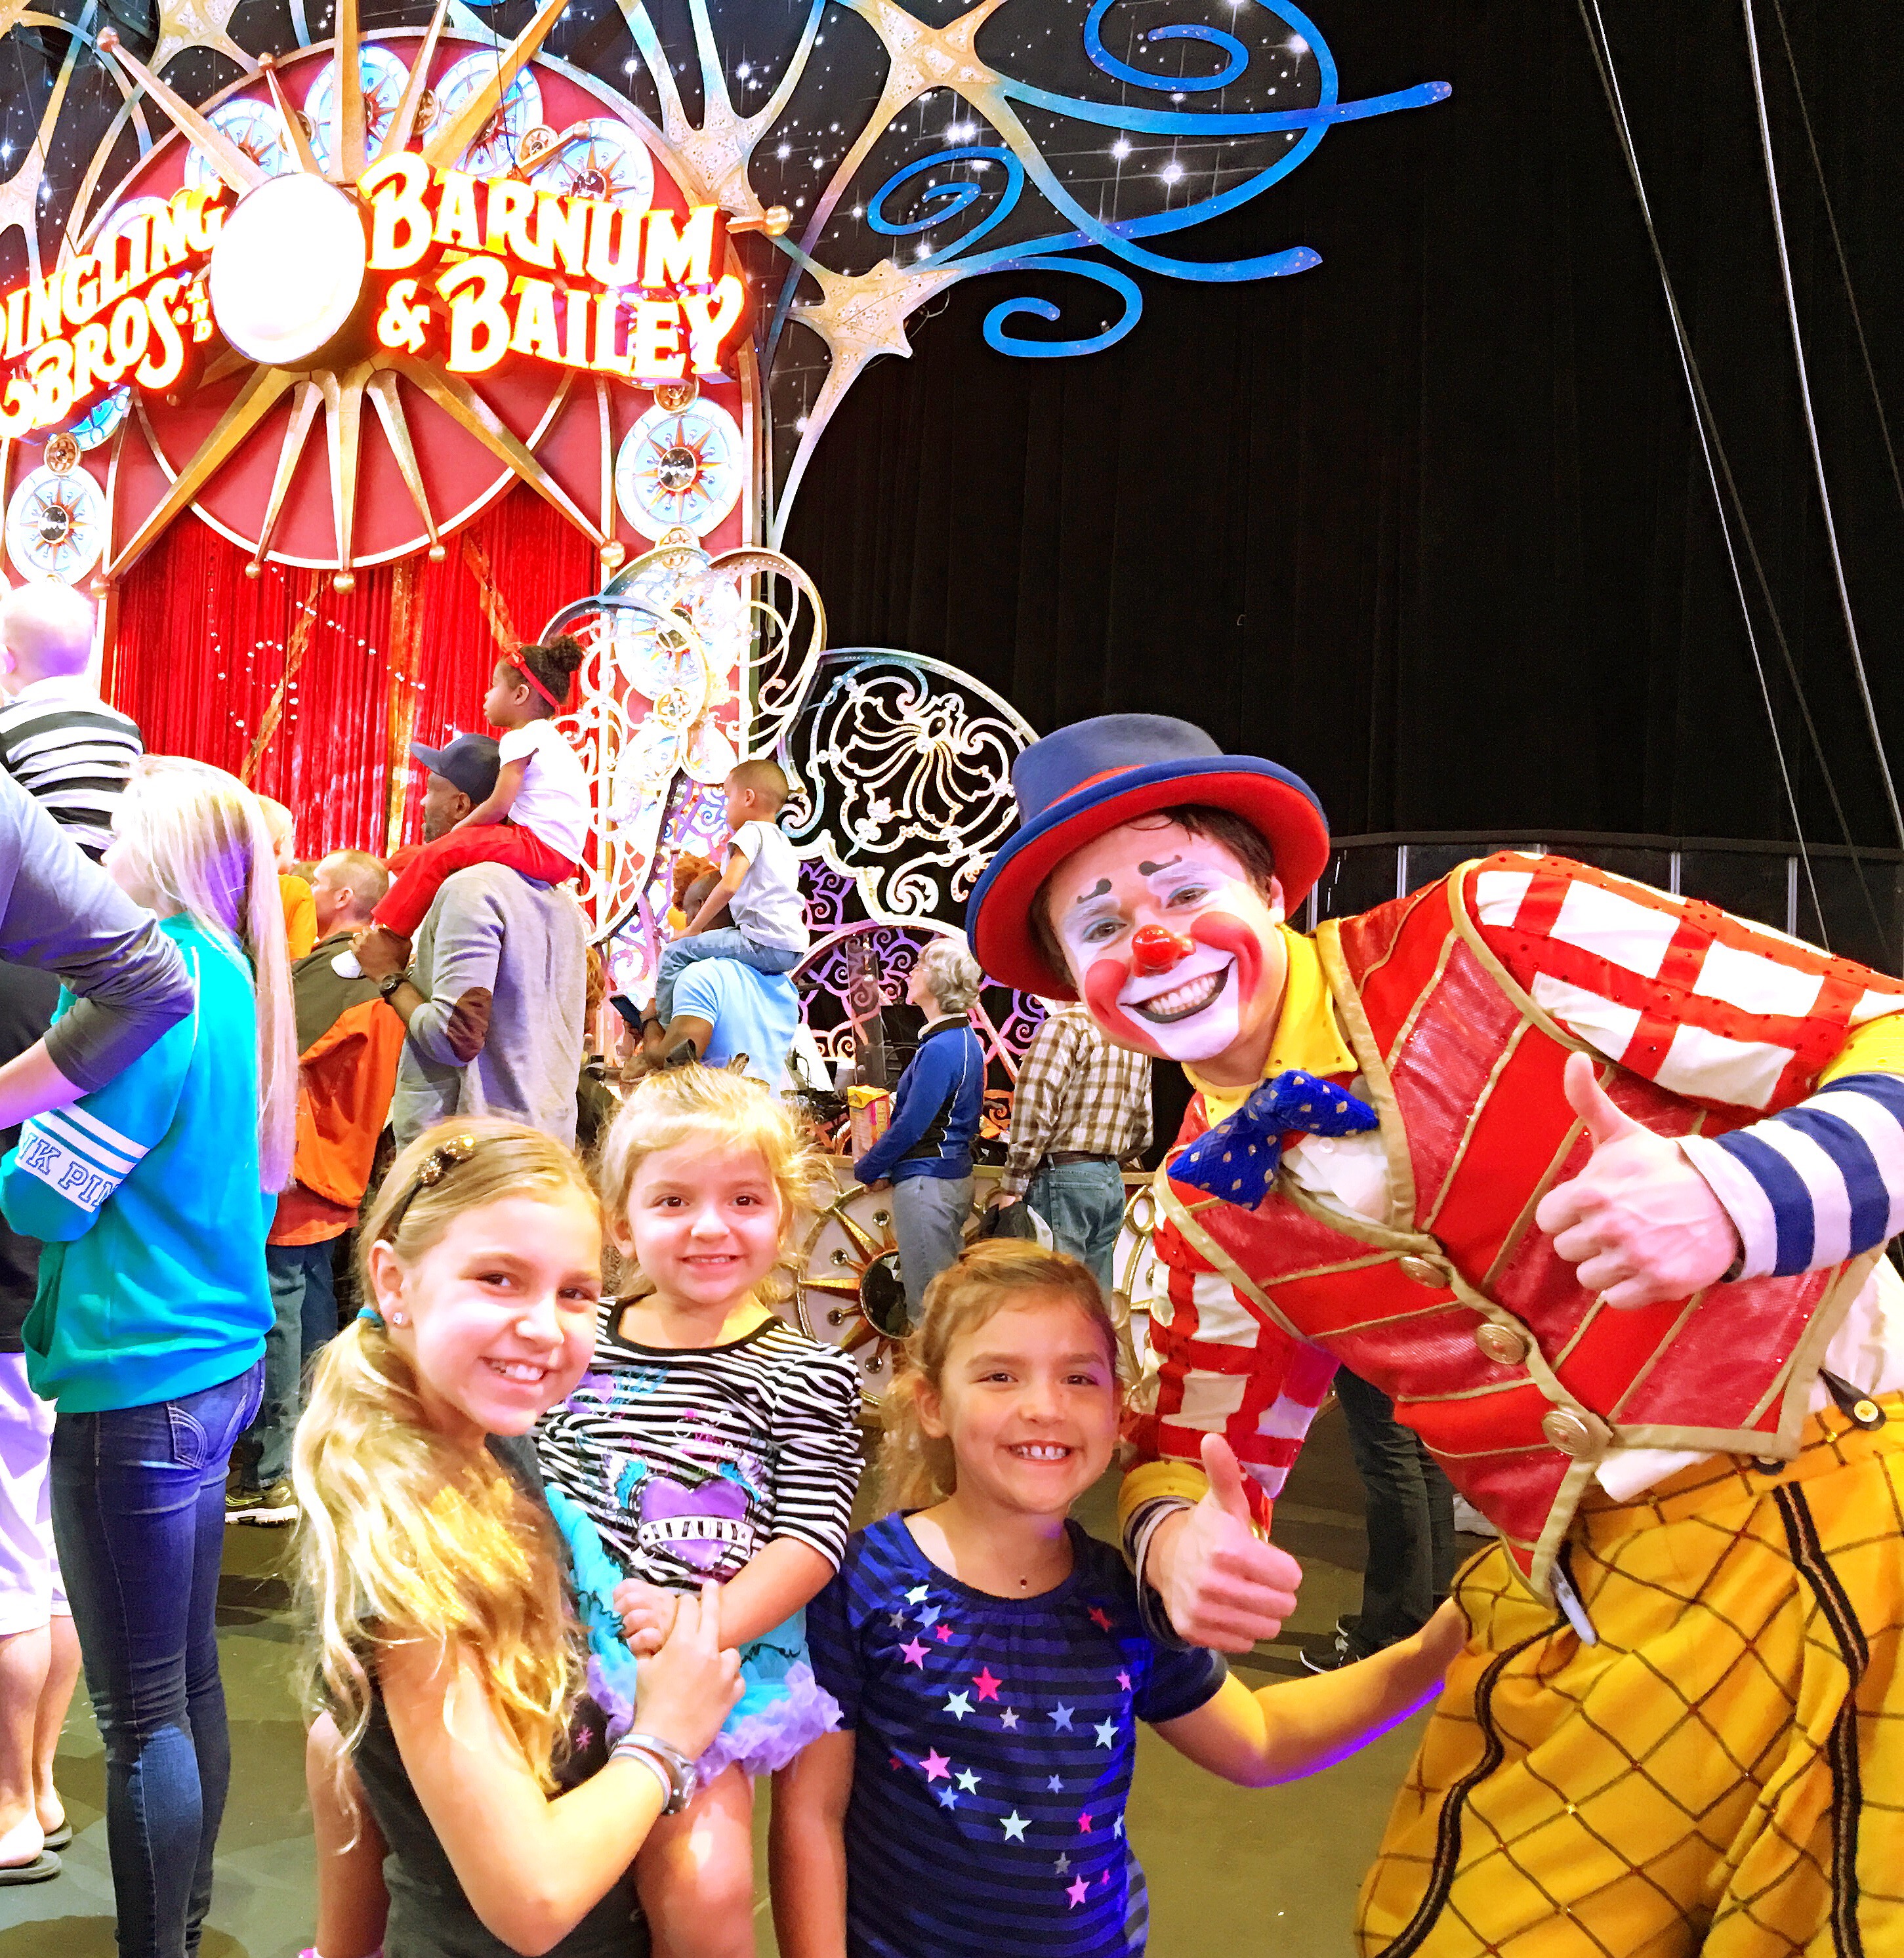 Ringling Brothers Circus: A Picture Review